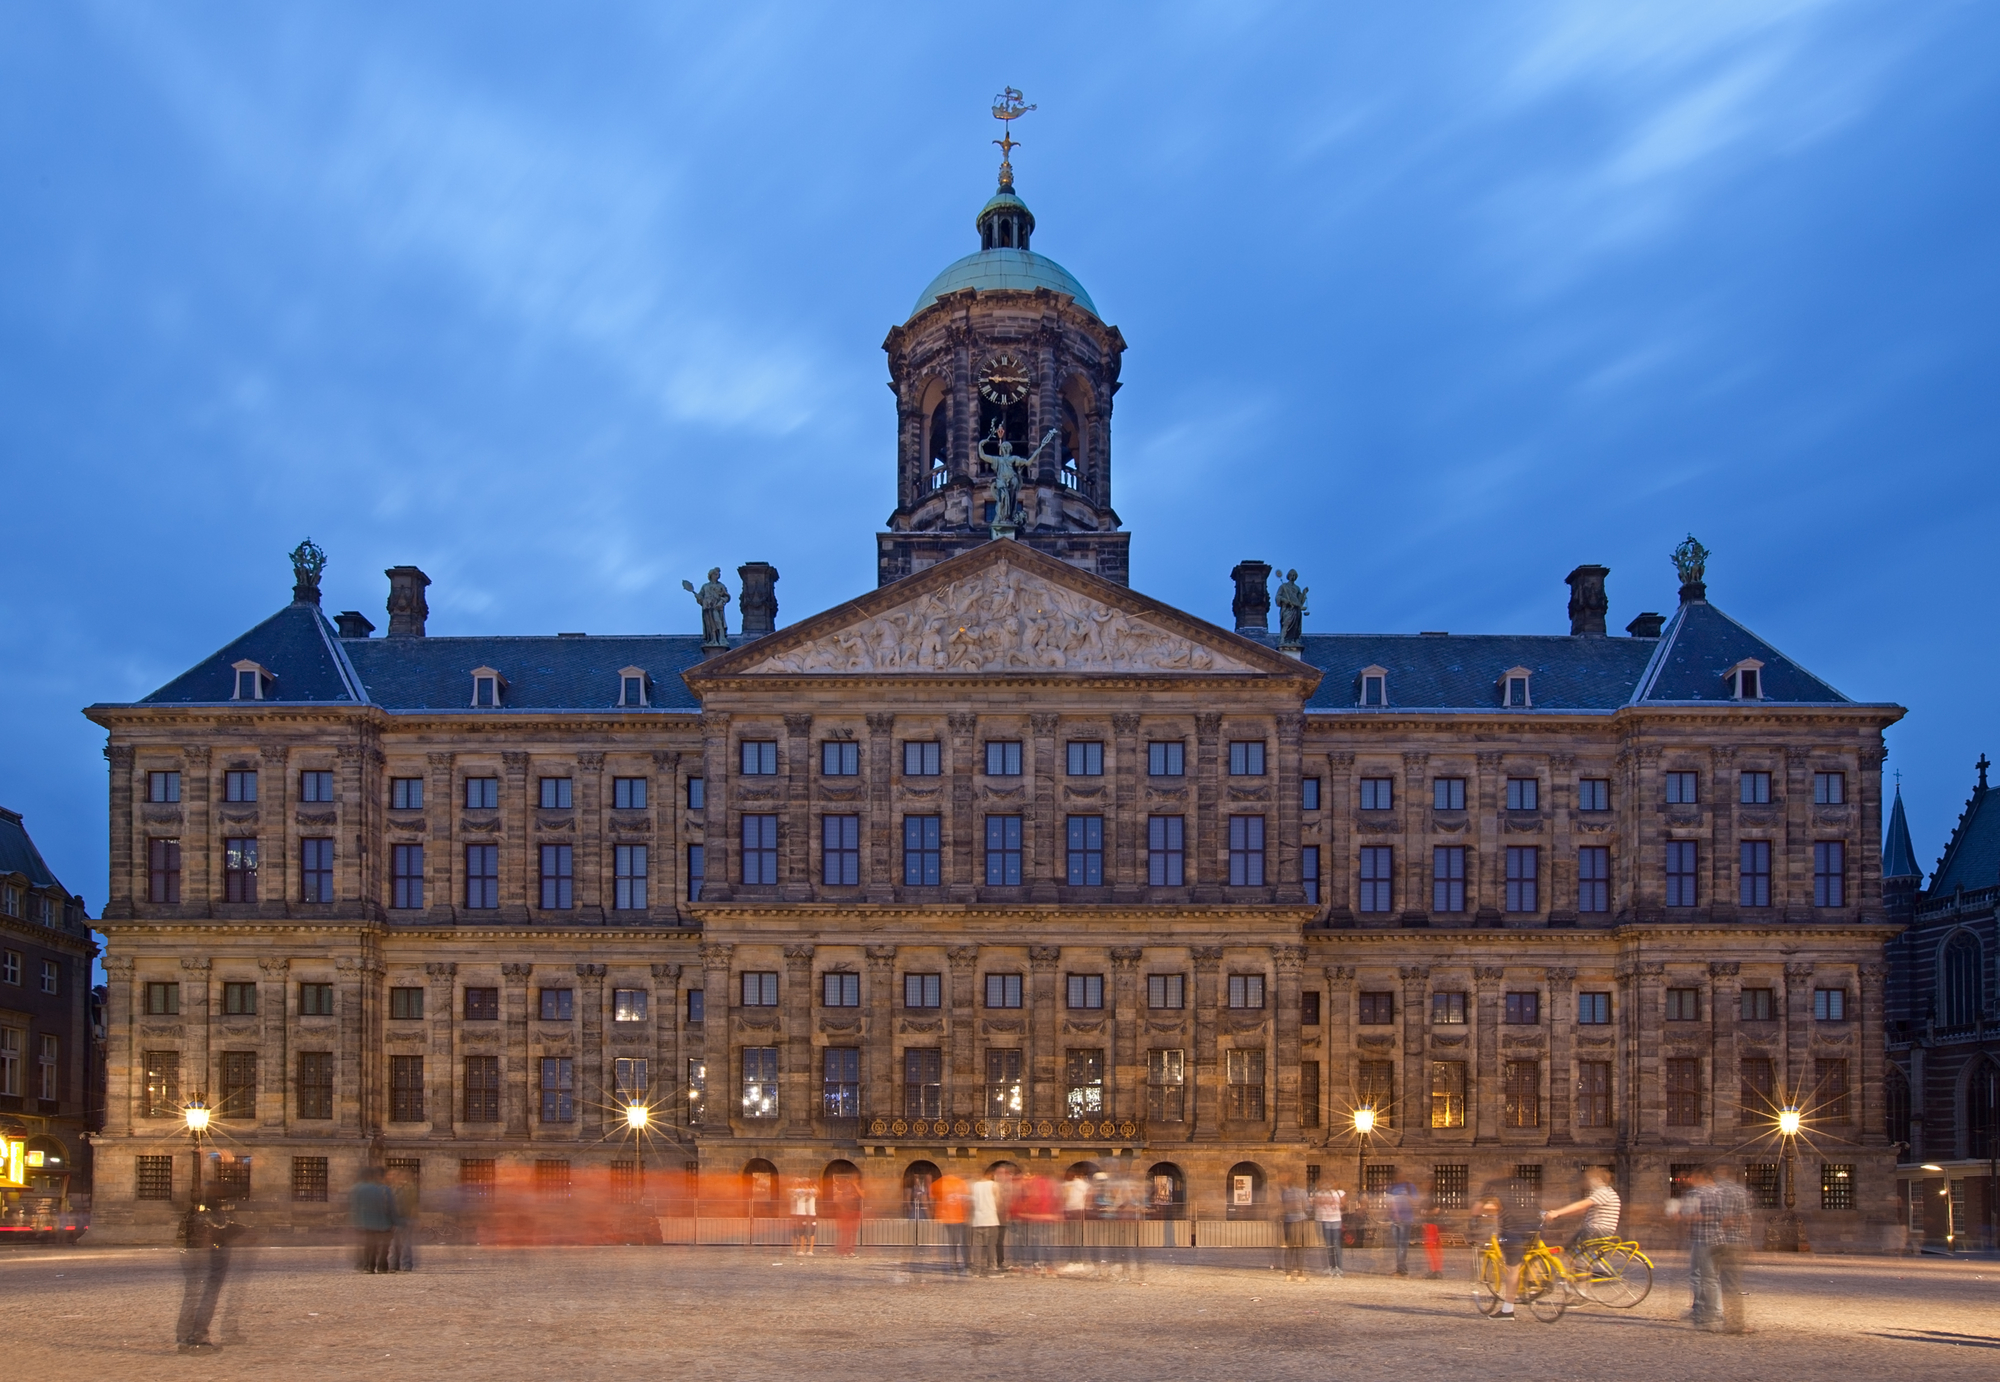 Historical landmarks in the Netherlands: Royal Palace Amsterdam